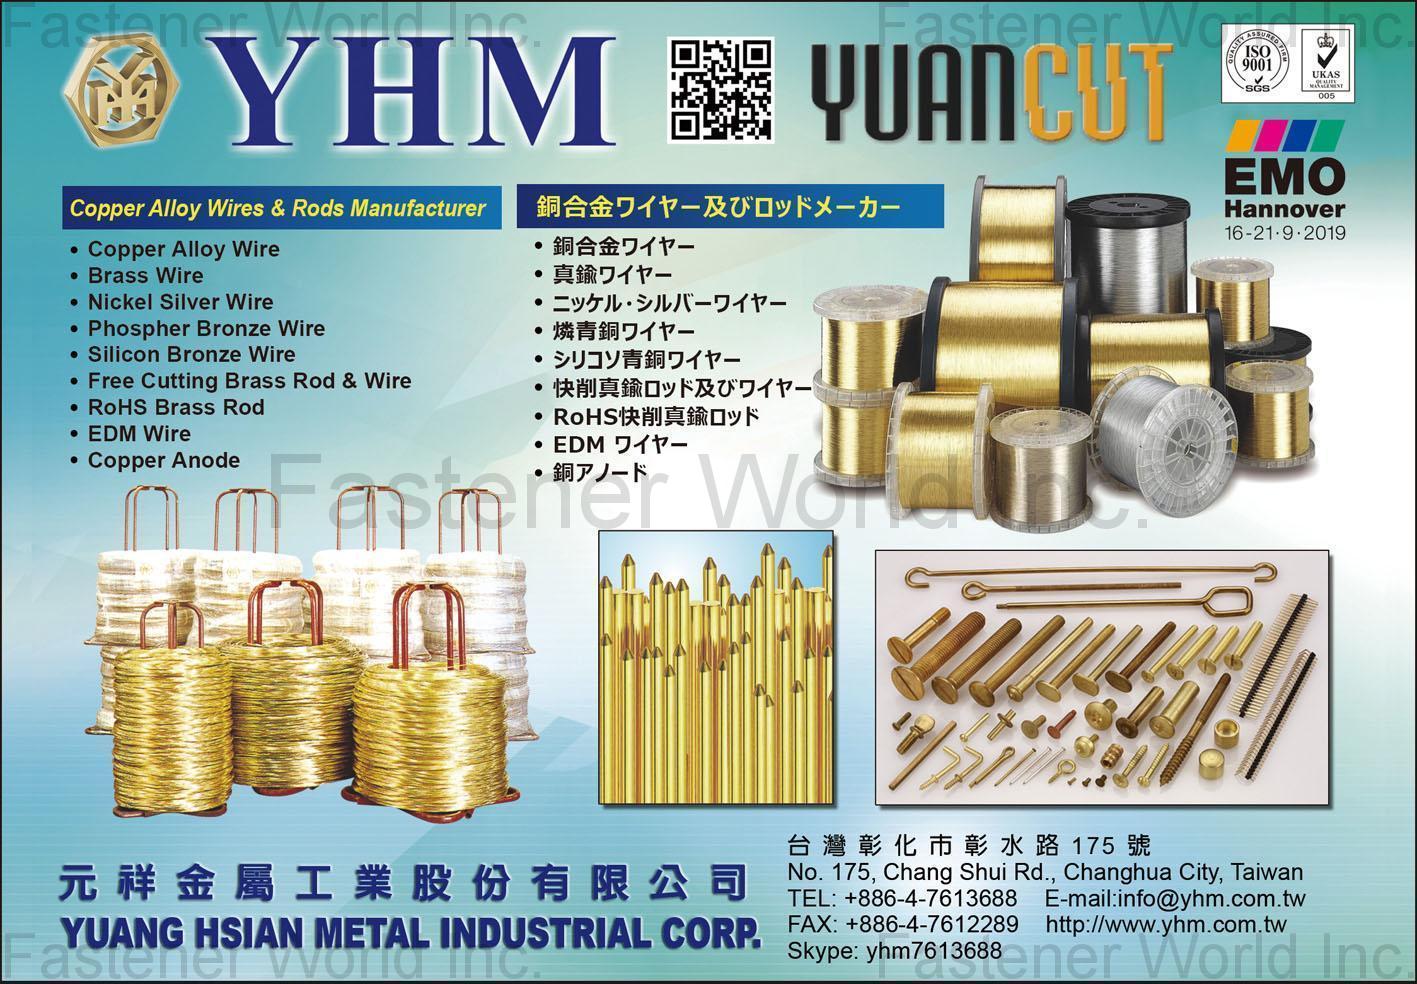 YUANG HSIAN METAL INDUSTRIAL CORP. (YHM) , Copper Alloy Wire, Brass Wire, Nickel Silver Wire, Phospher Bronze Wire, Silicon Bronze Wire, Free Cutting Brass Rod & Wire, RoHS Brass Rod, EDM Wire, Copper Anode , Bronze